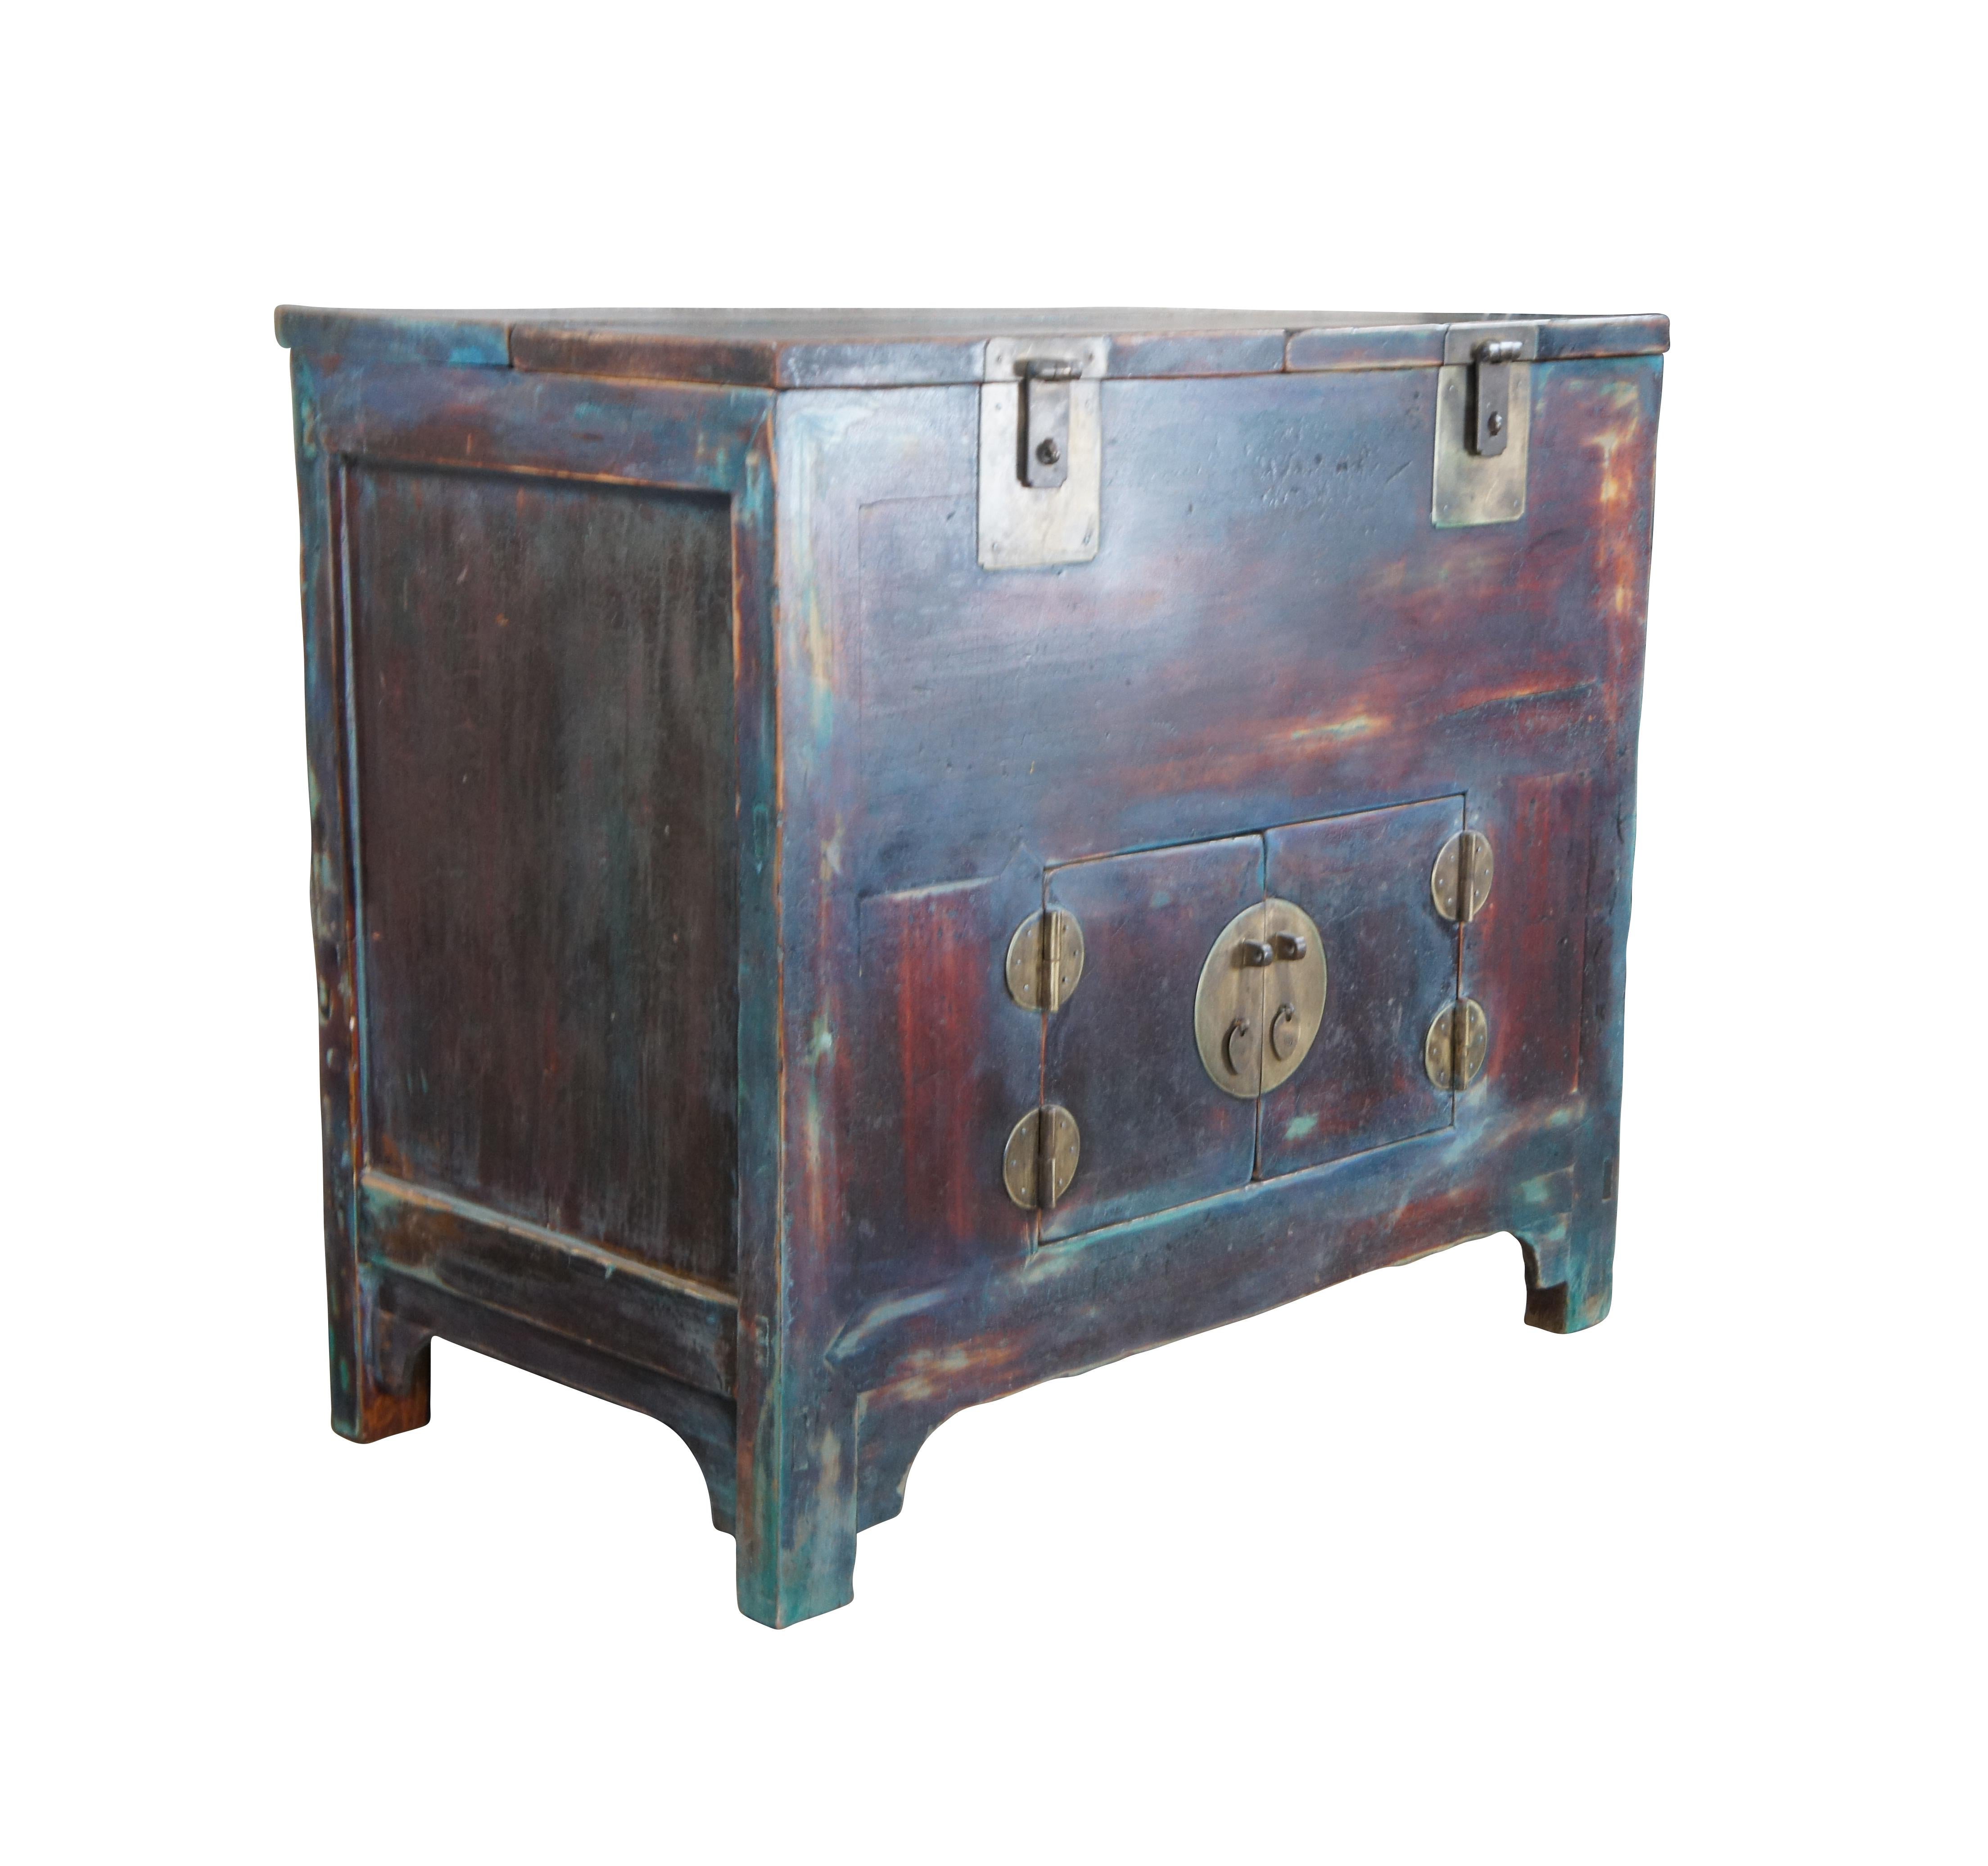 Late Qing Dynasty iridescent painted Elm Money Trunk / Storage Chest. Made in Shandong East China, circa 1870s. Features two upper compartments and lower cabinet for accessory storage. Upper compartments have brass latches allowing them to be locked